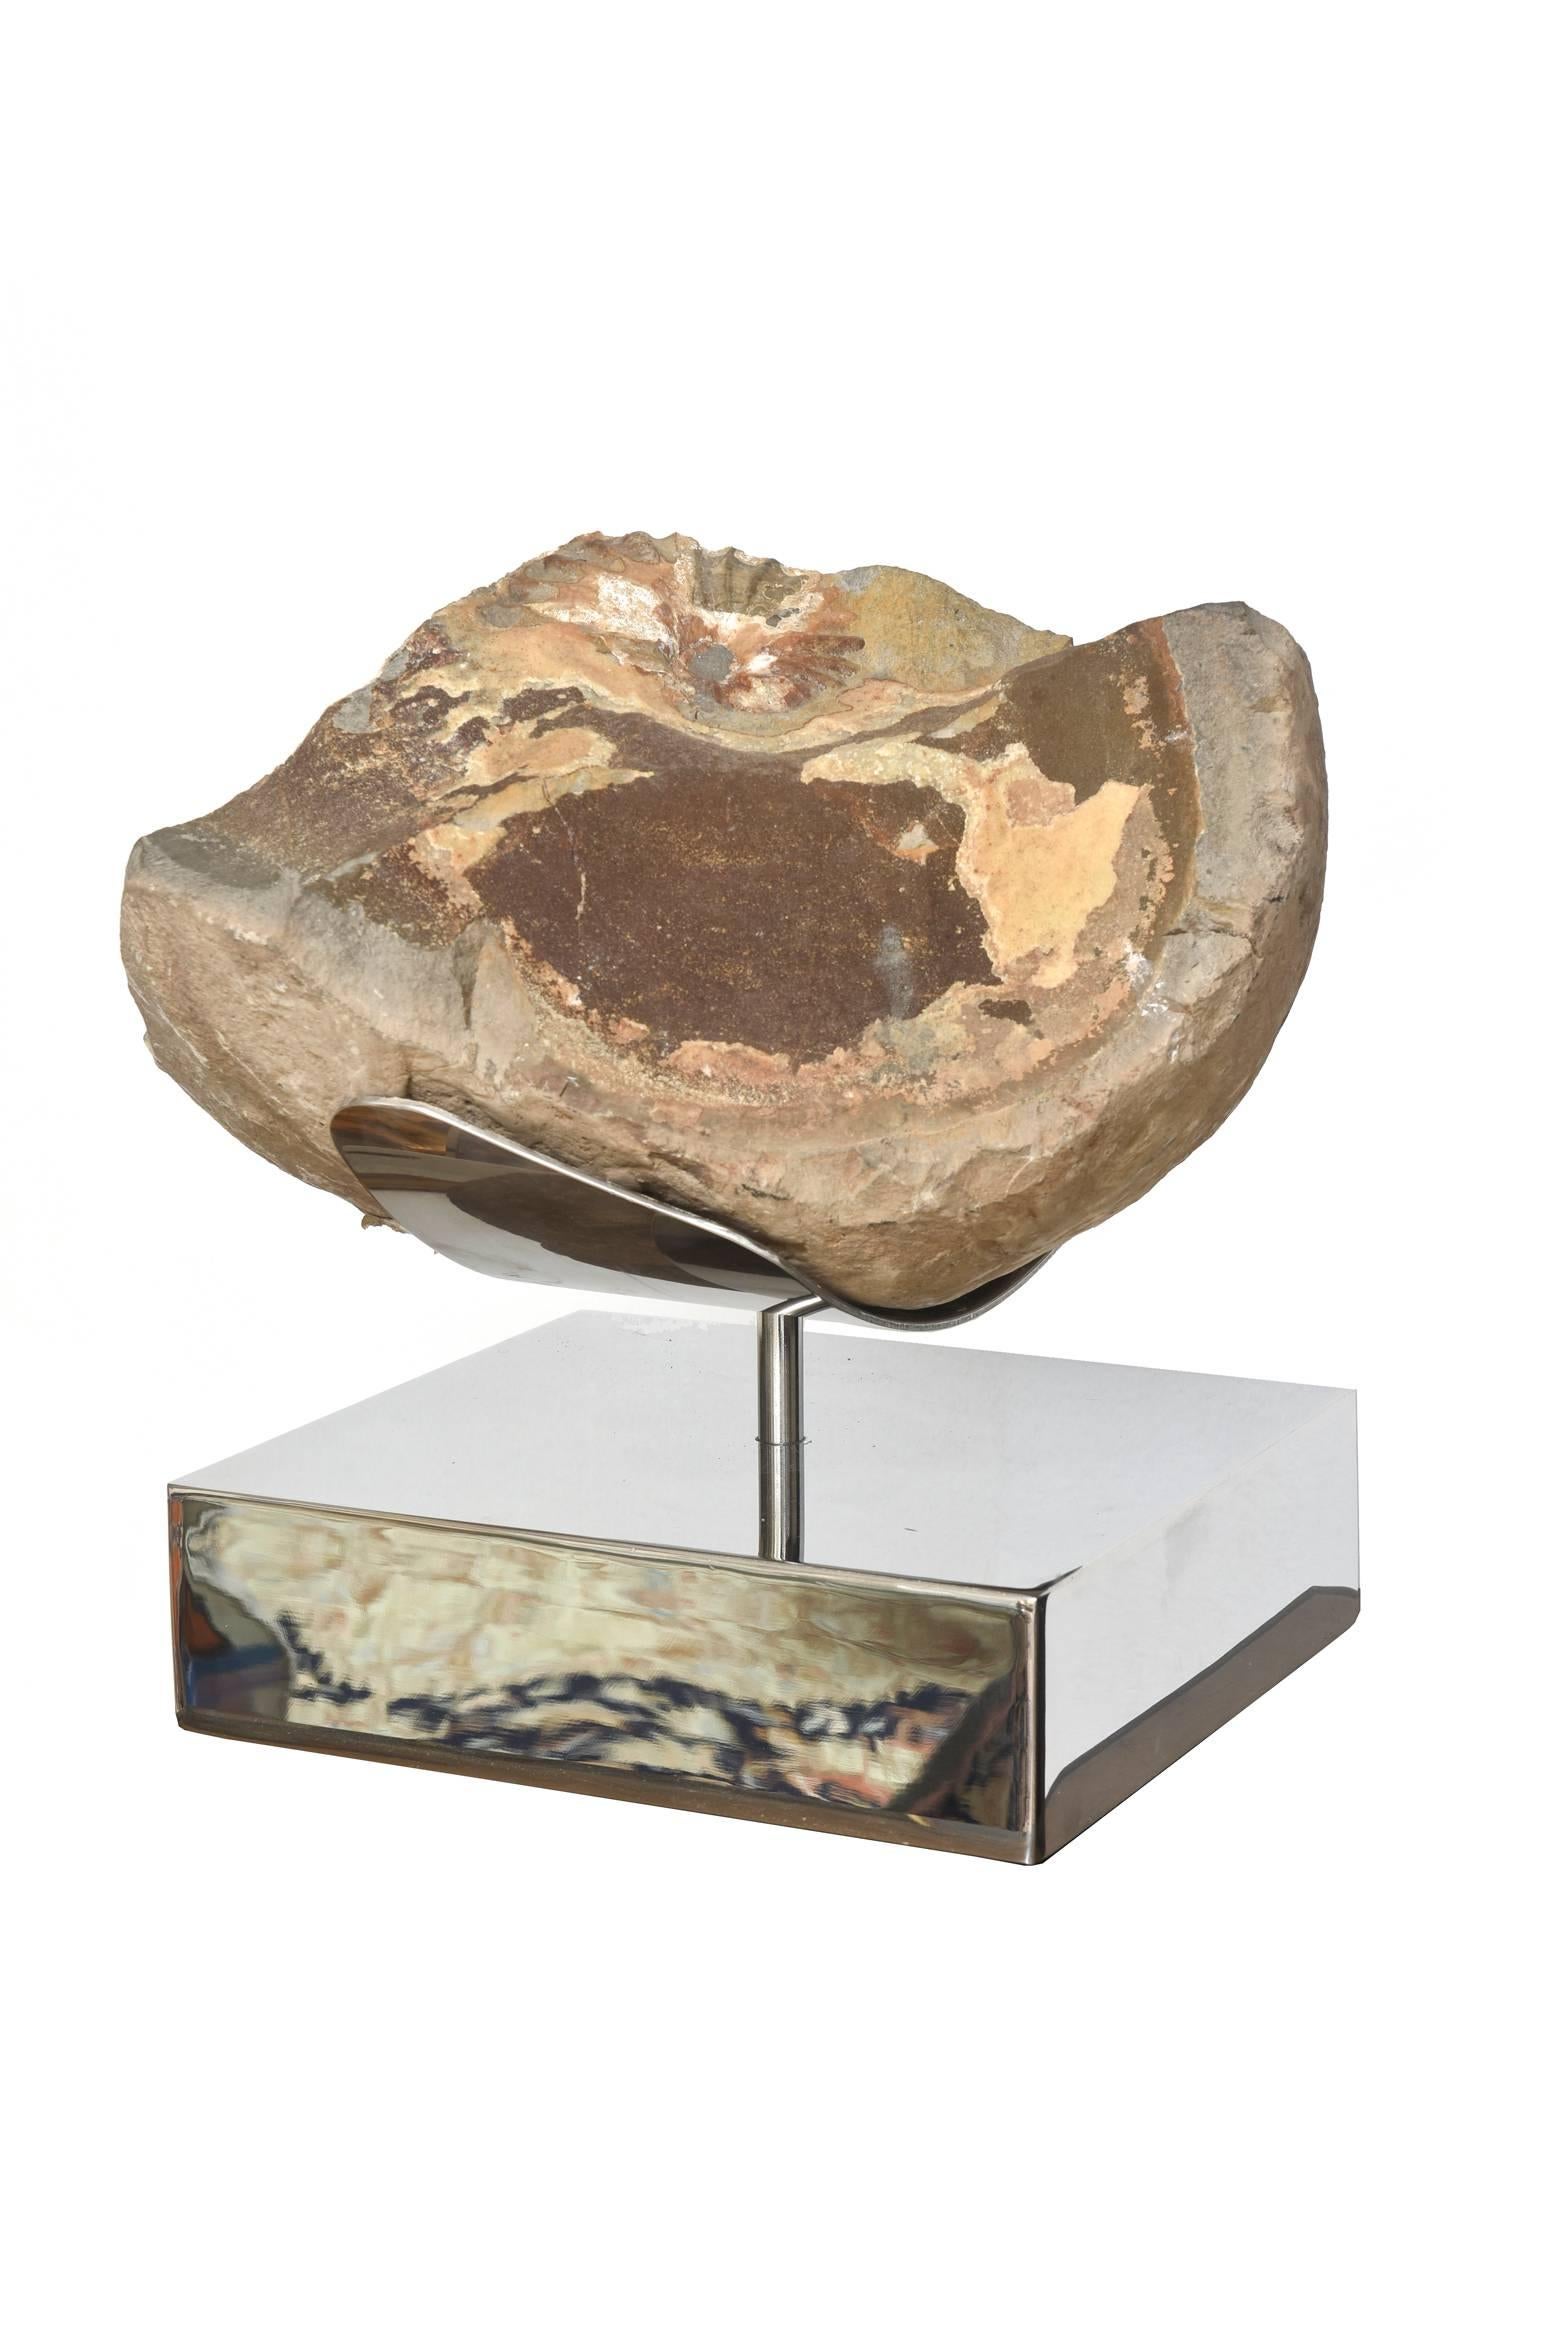 This amazing petrified wood sculpture that is over 100 years old has a custom stainless steel contemporary base. It has been mounted. This fossil/petrified wood is originally from Utah. The base measures 10